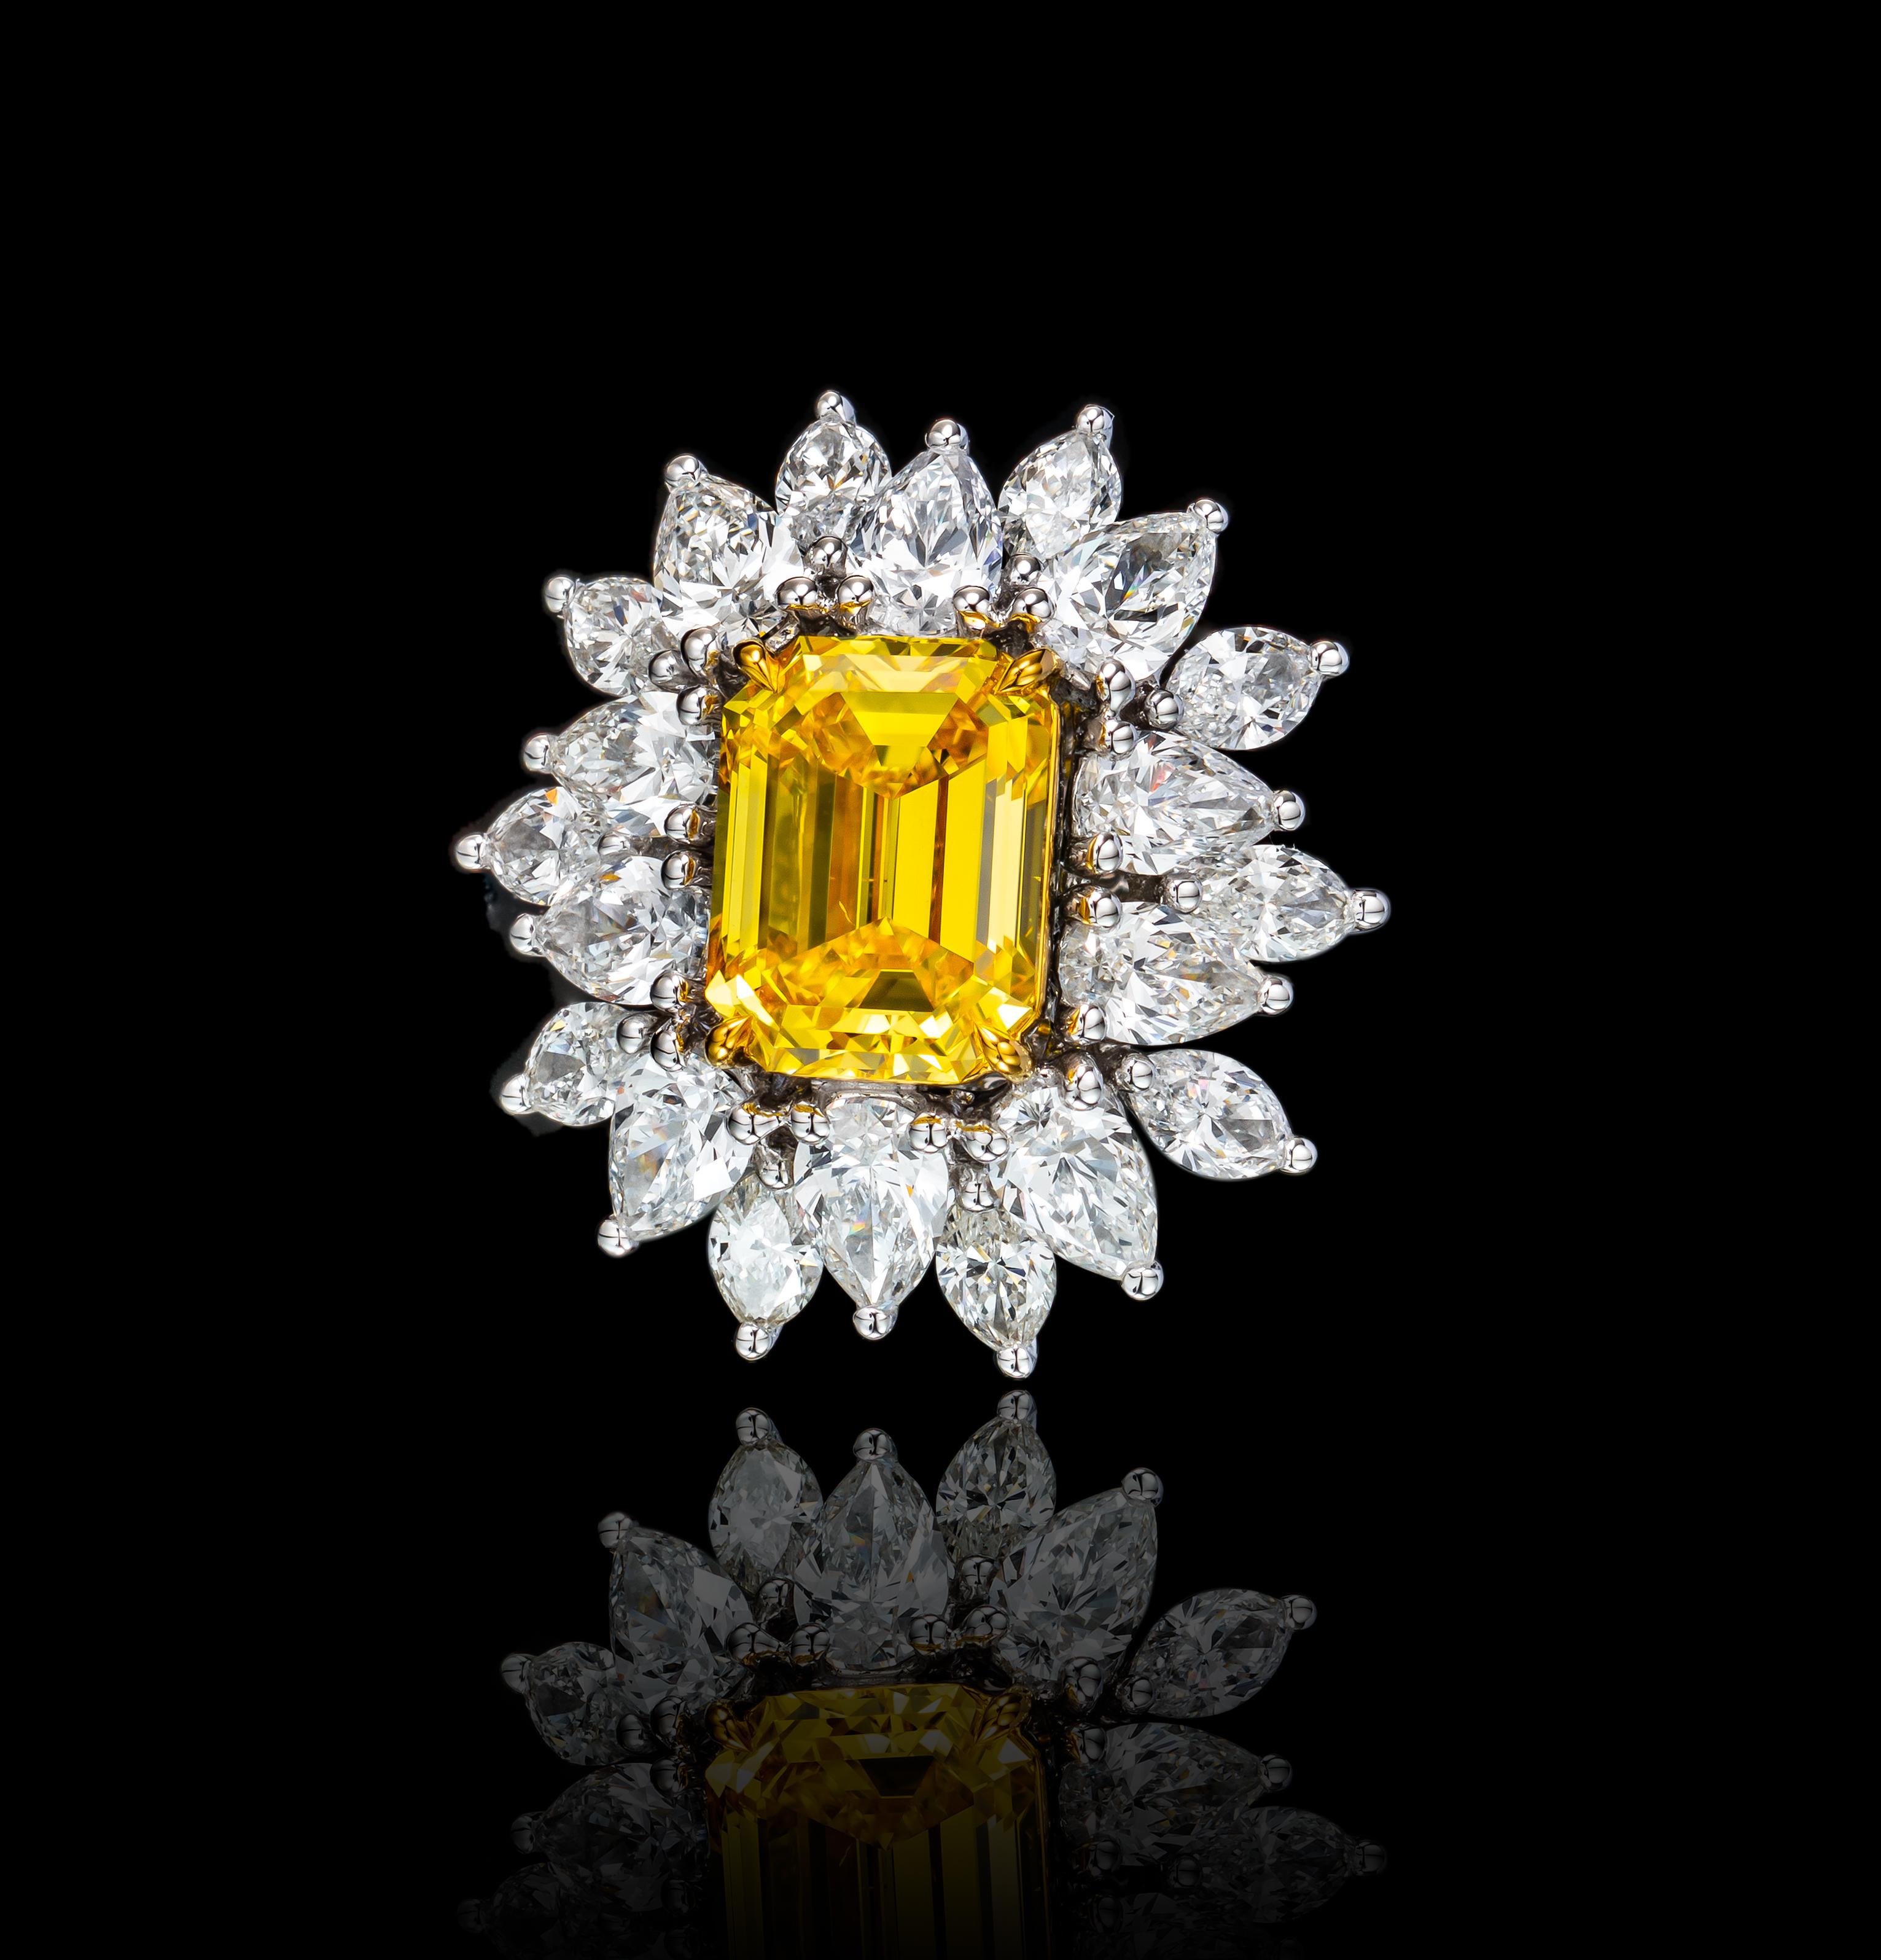 Victorian GIA Certified Floral 2.01 Carat Emerald Fancy Vivid Yellow Diamond Ring